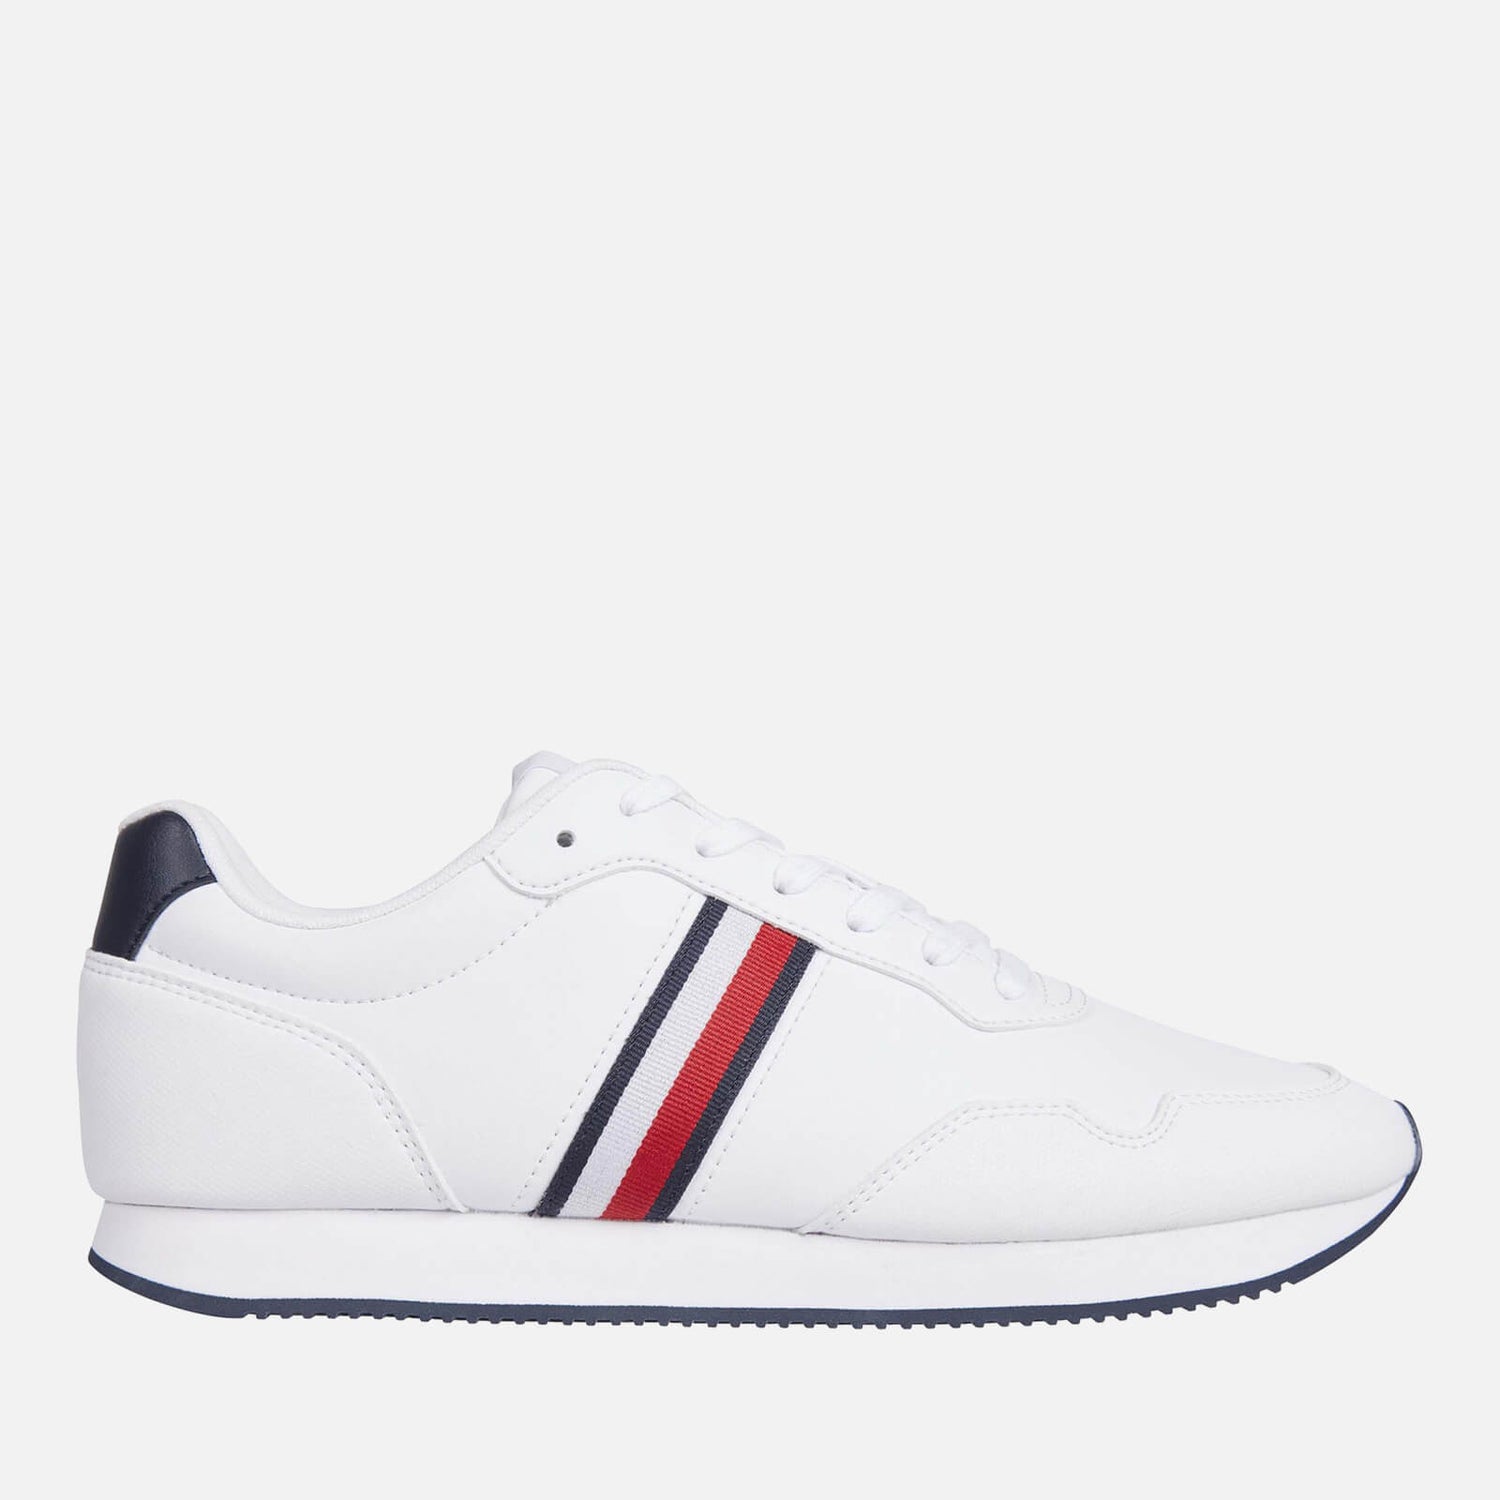 Tommy Hilfiger Men's Leather Running Style Trainers - UK 7